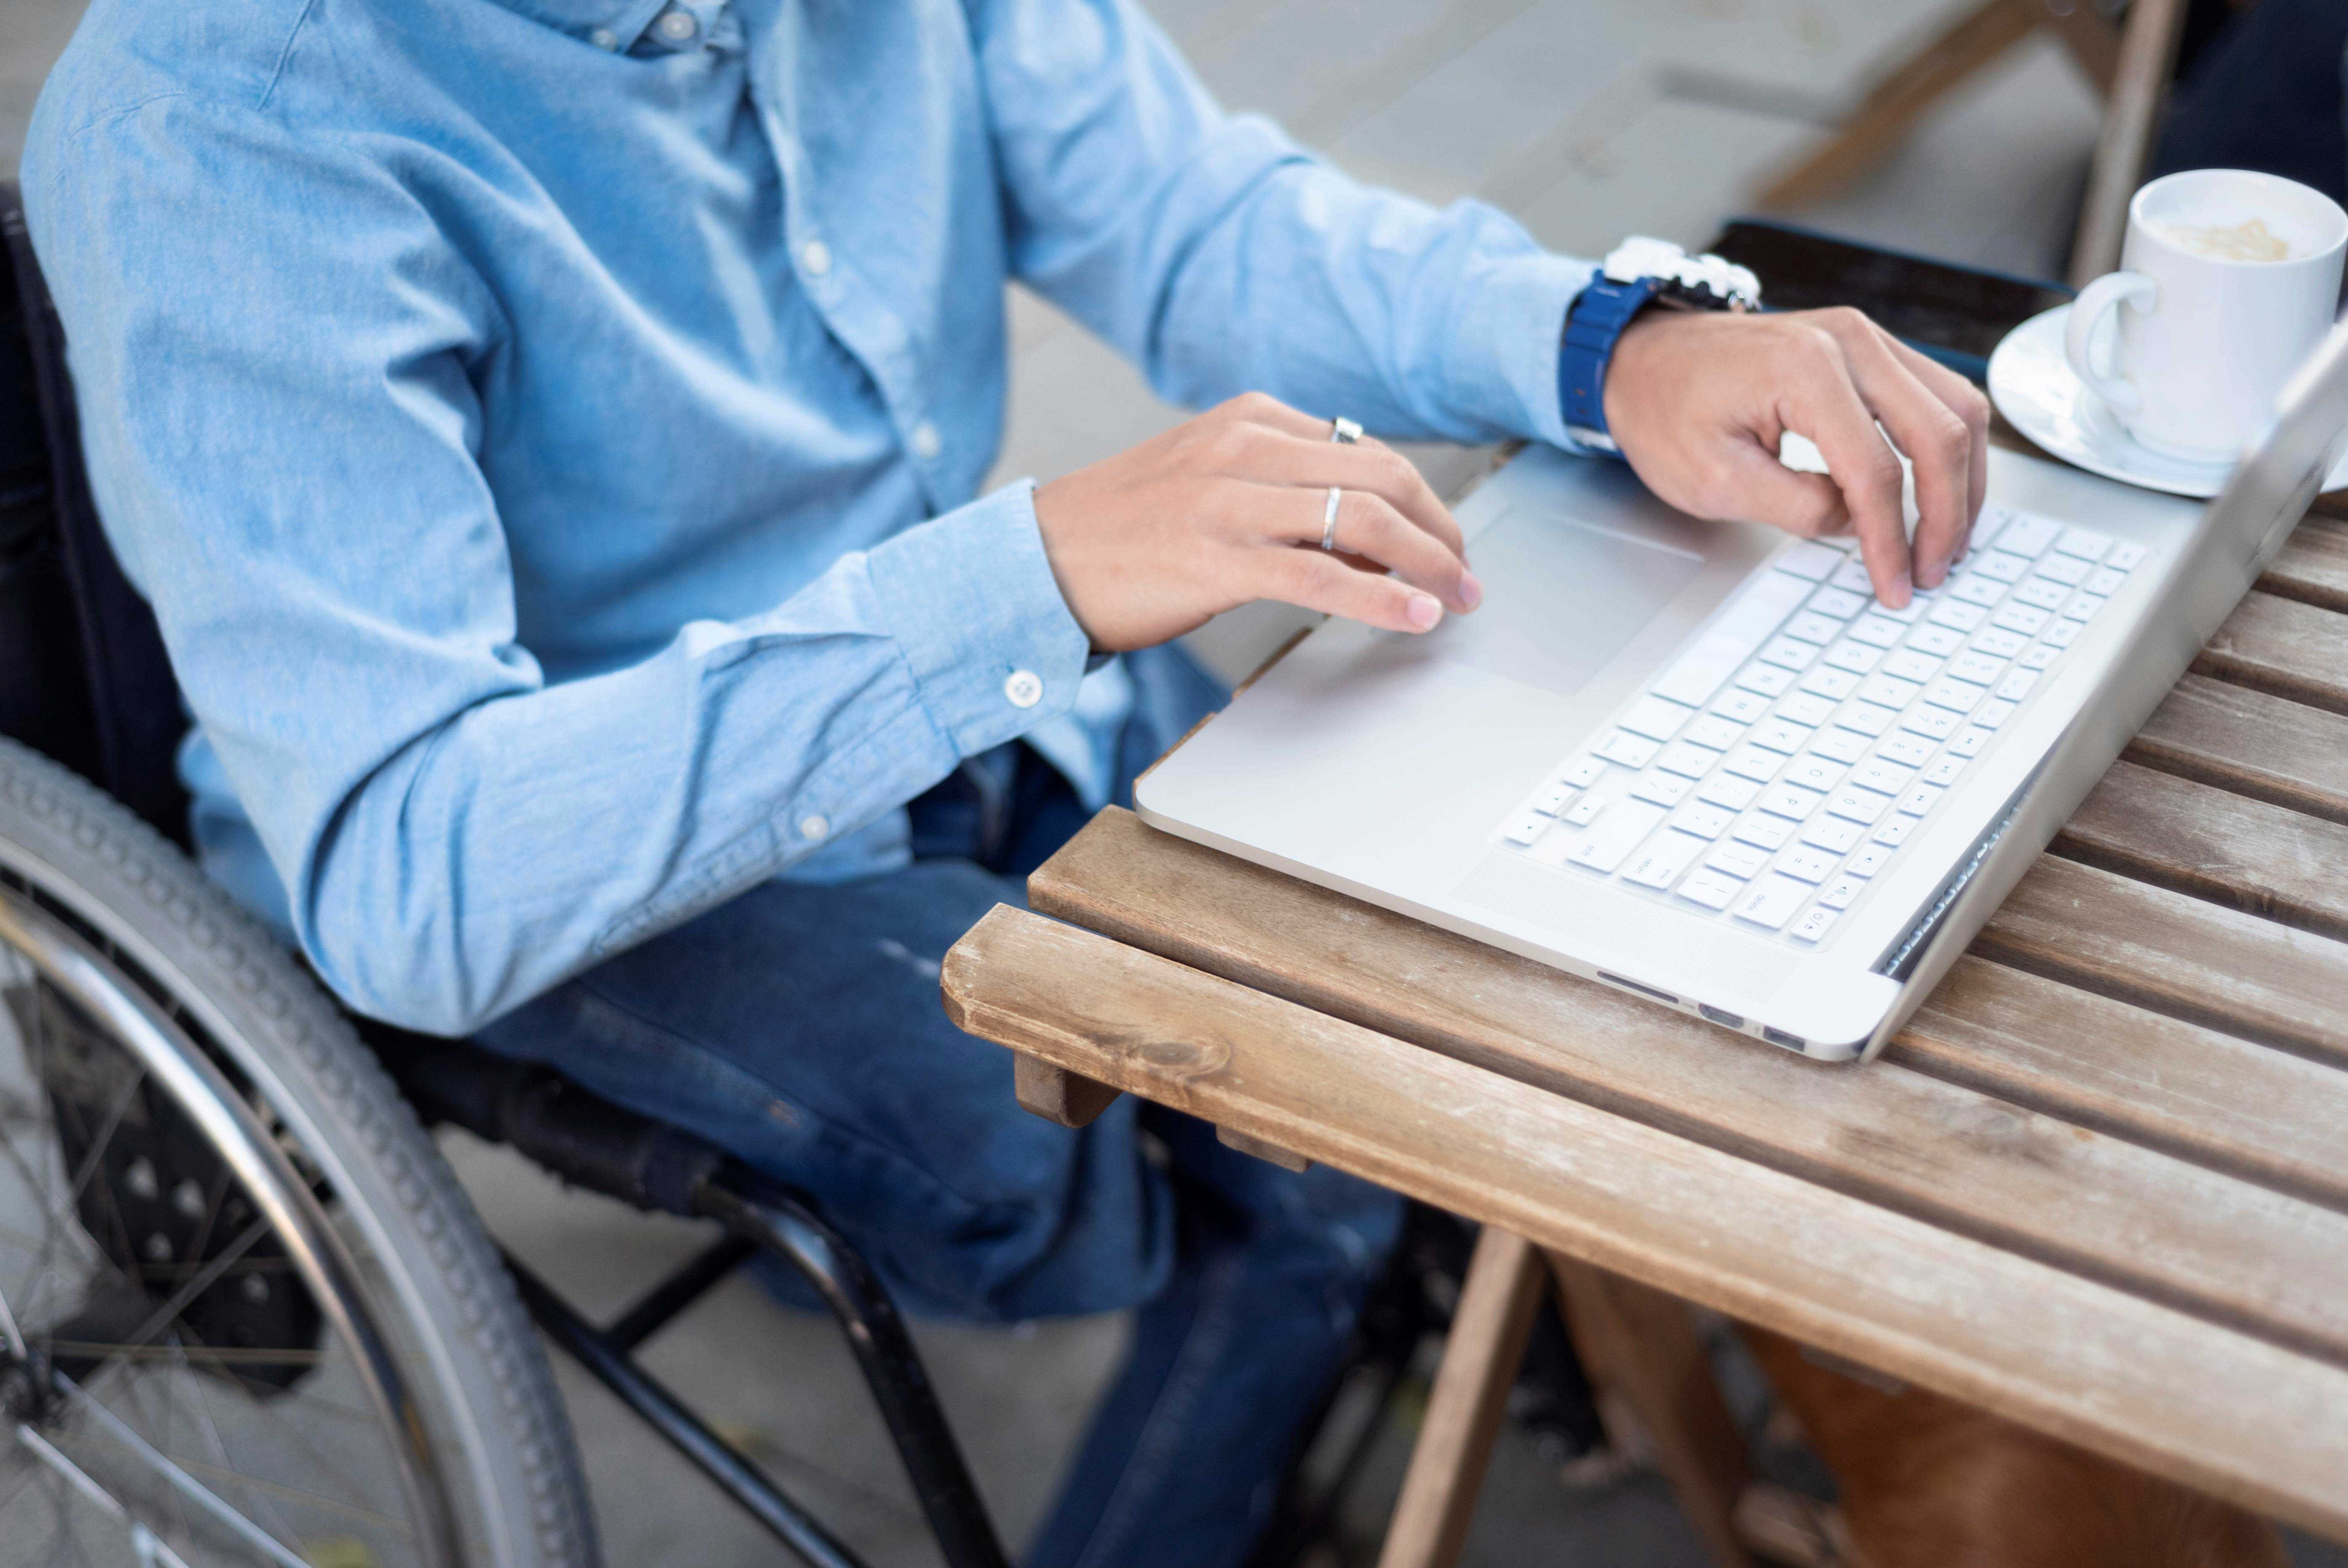 Disabled man working on laptop